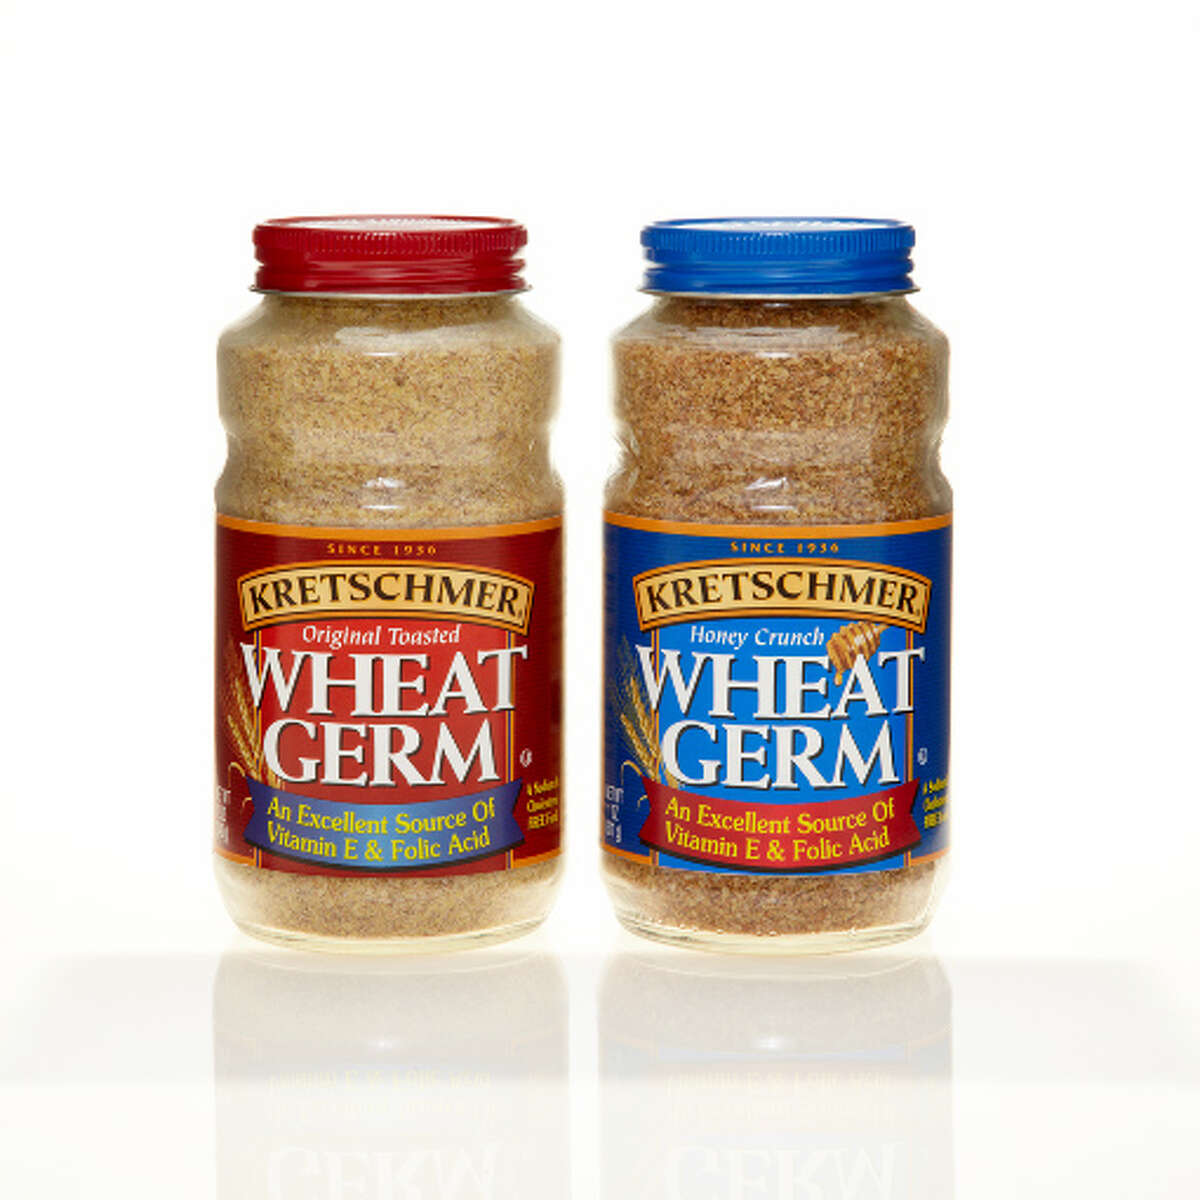 Sun Country Foods, owned by Brynwood Partners, a private equity firm in Greenwich, Conn. has embarked on a new marketing campaign for Kretschmer Wheat Germ, hoping to lure a new generation of health-focused consumers to the brand, which has been on the market since 1936.